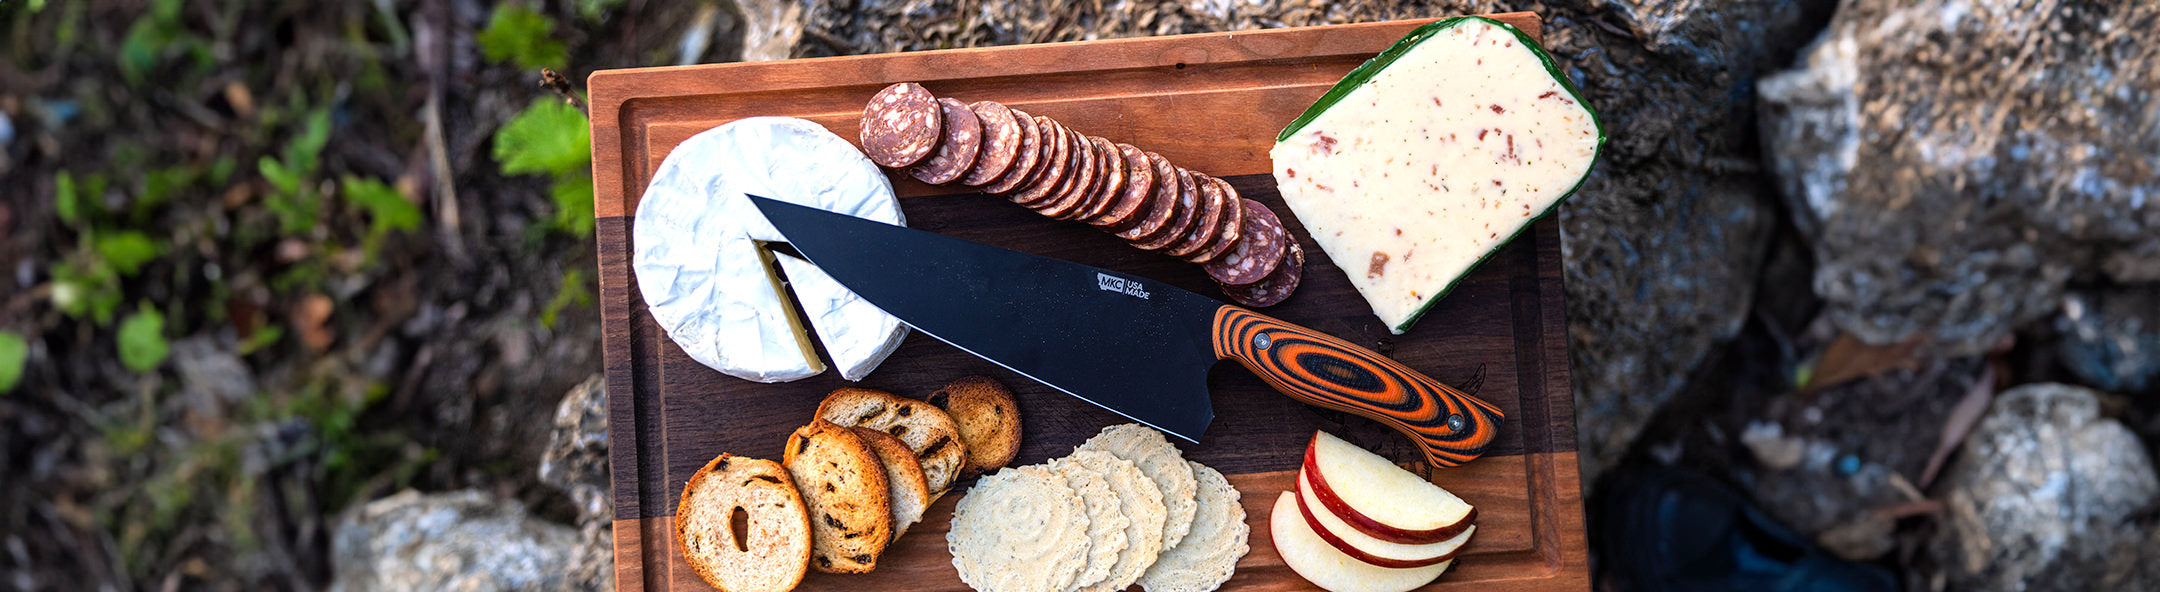 Chef knife with meats and cheeses on wooden cutting board.